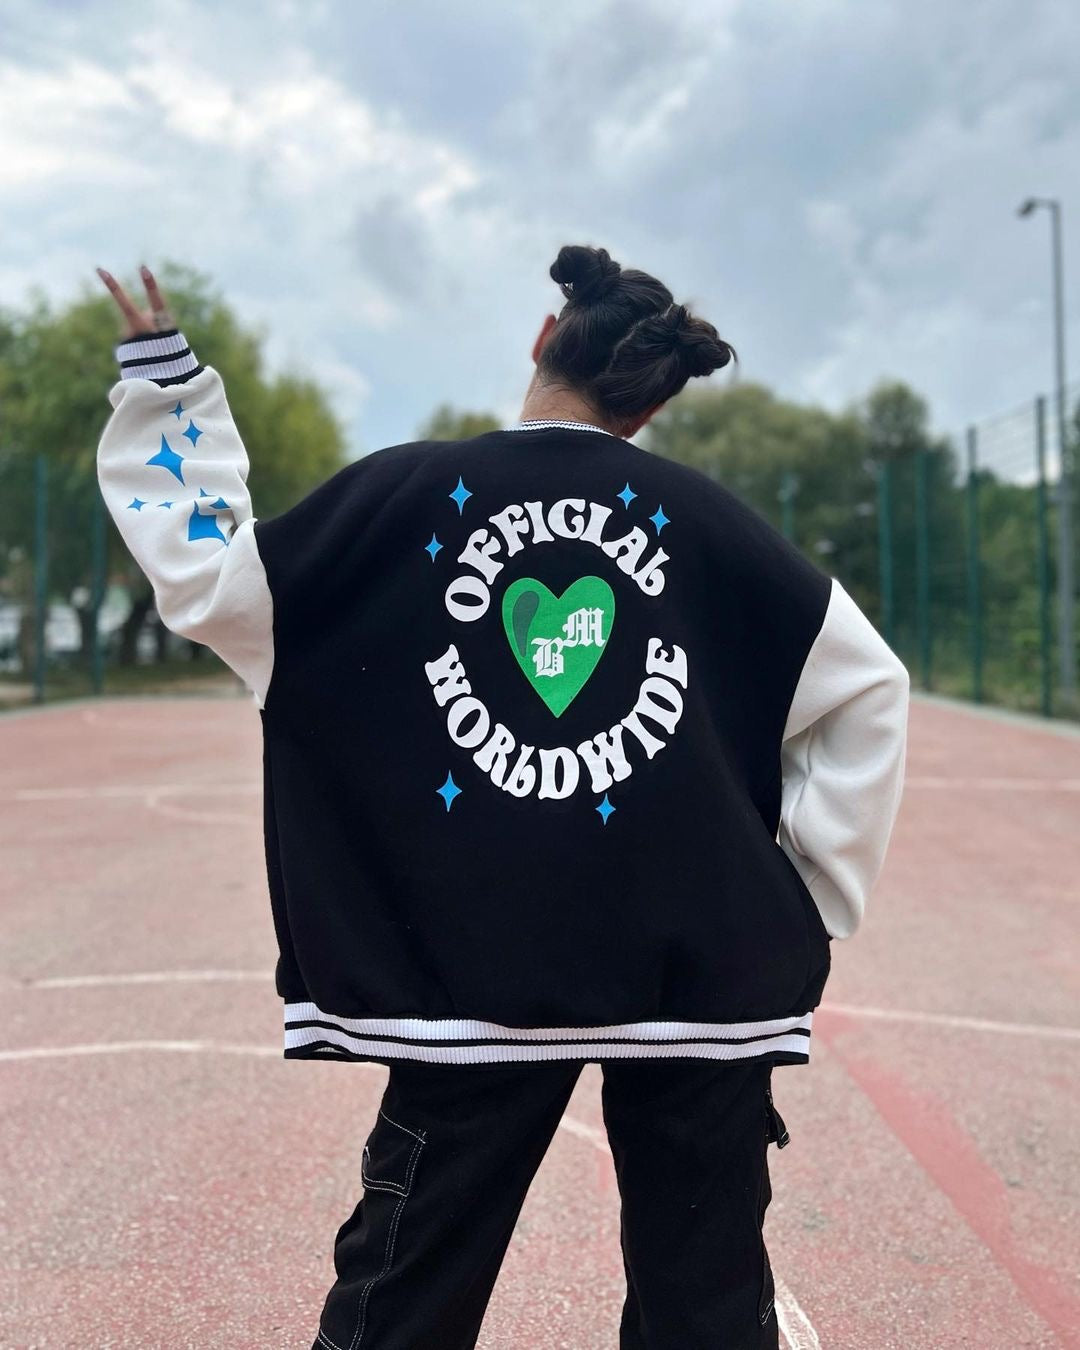 officiall Worldwide College Jacket